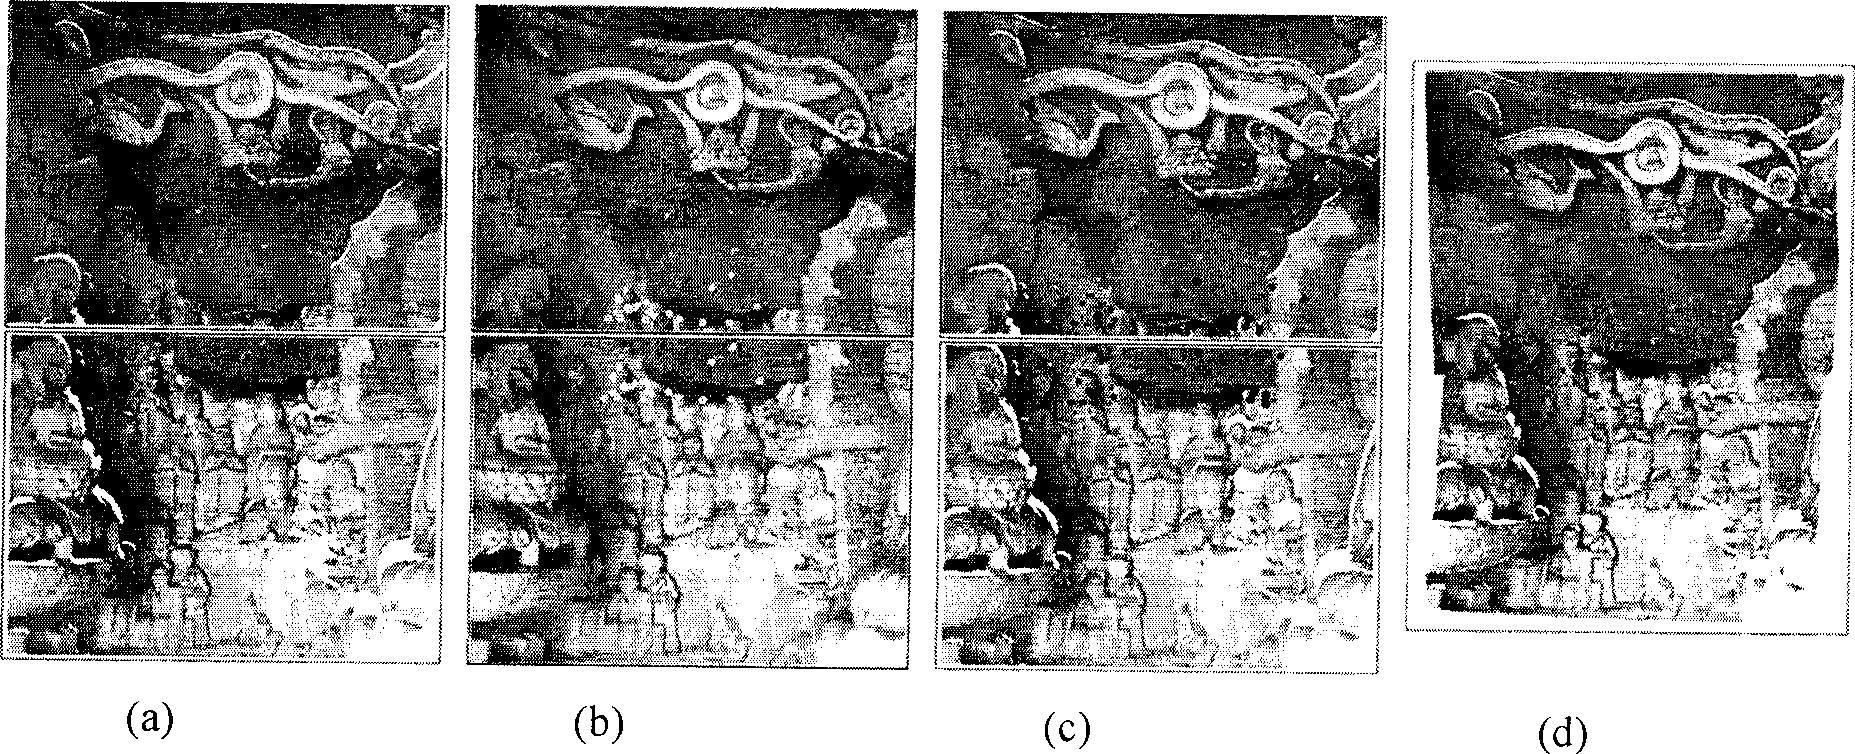 Depth image autoegistration method combined with texture information